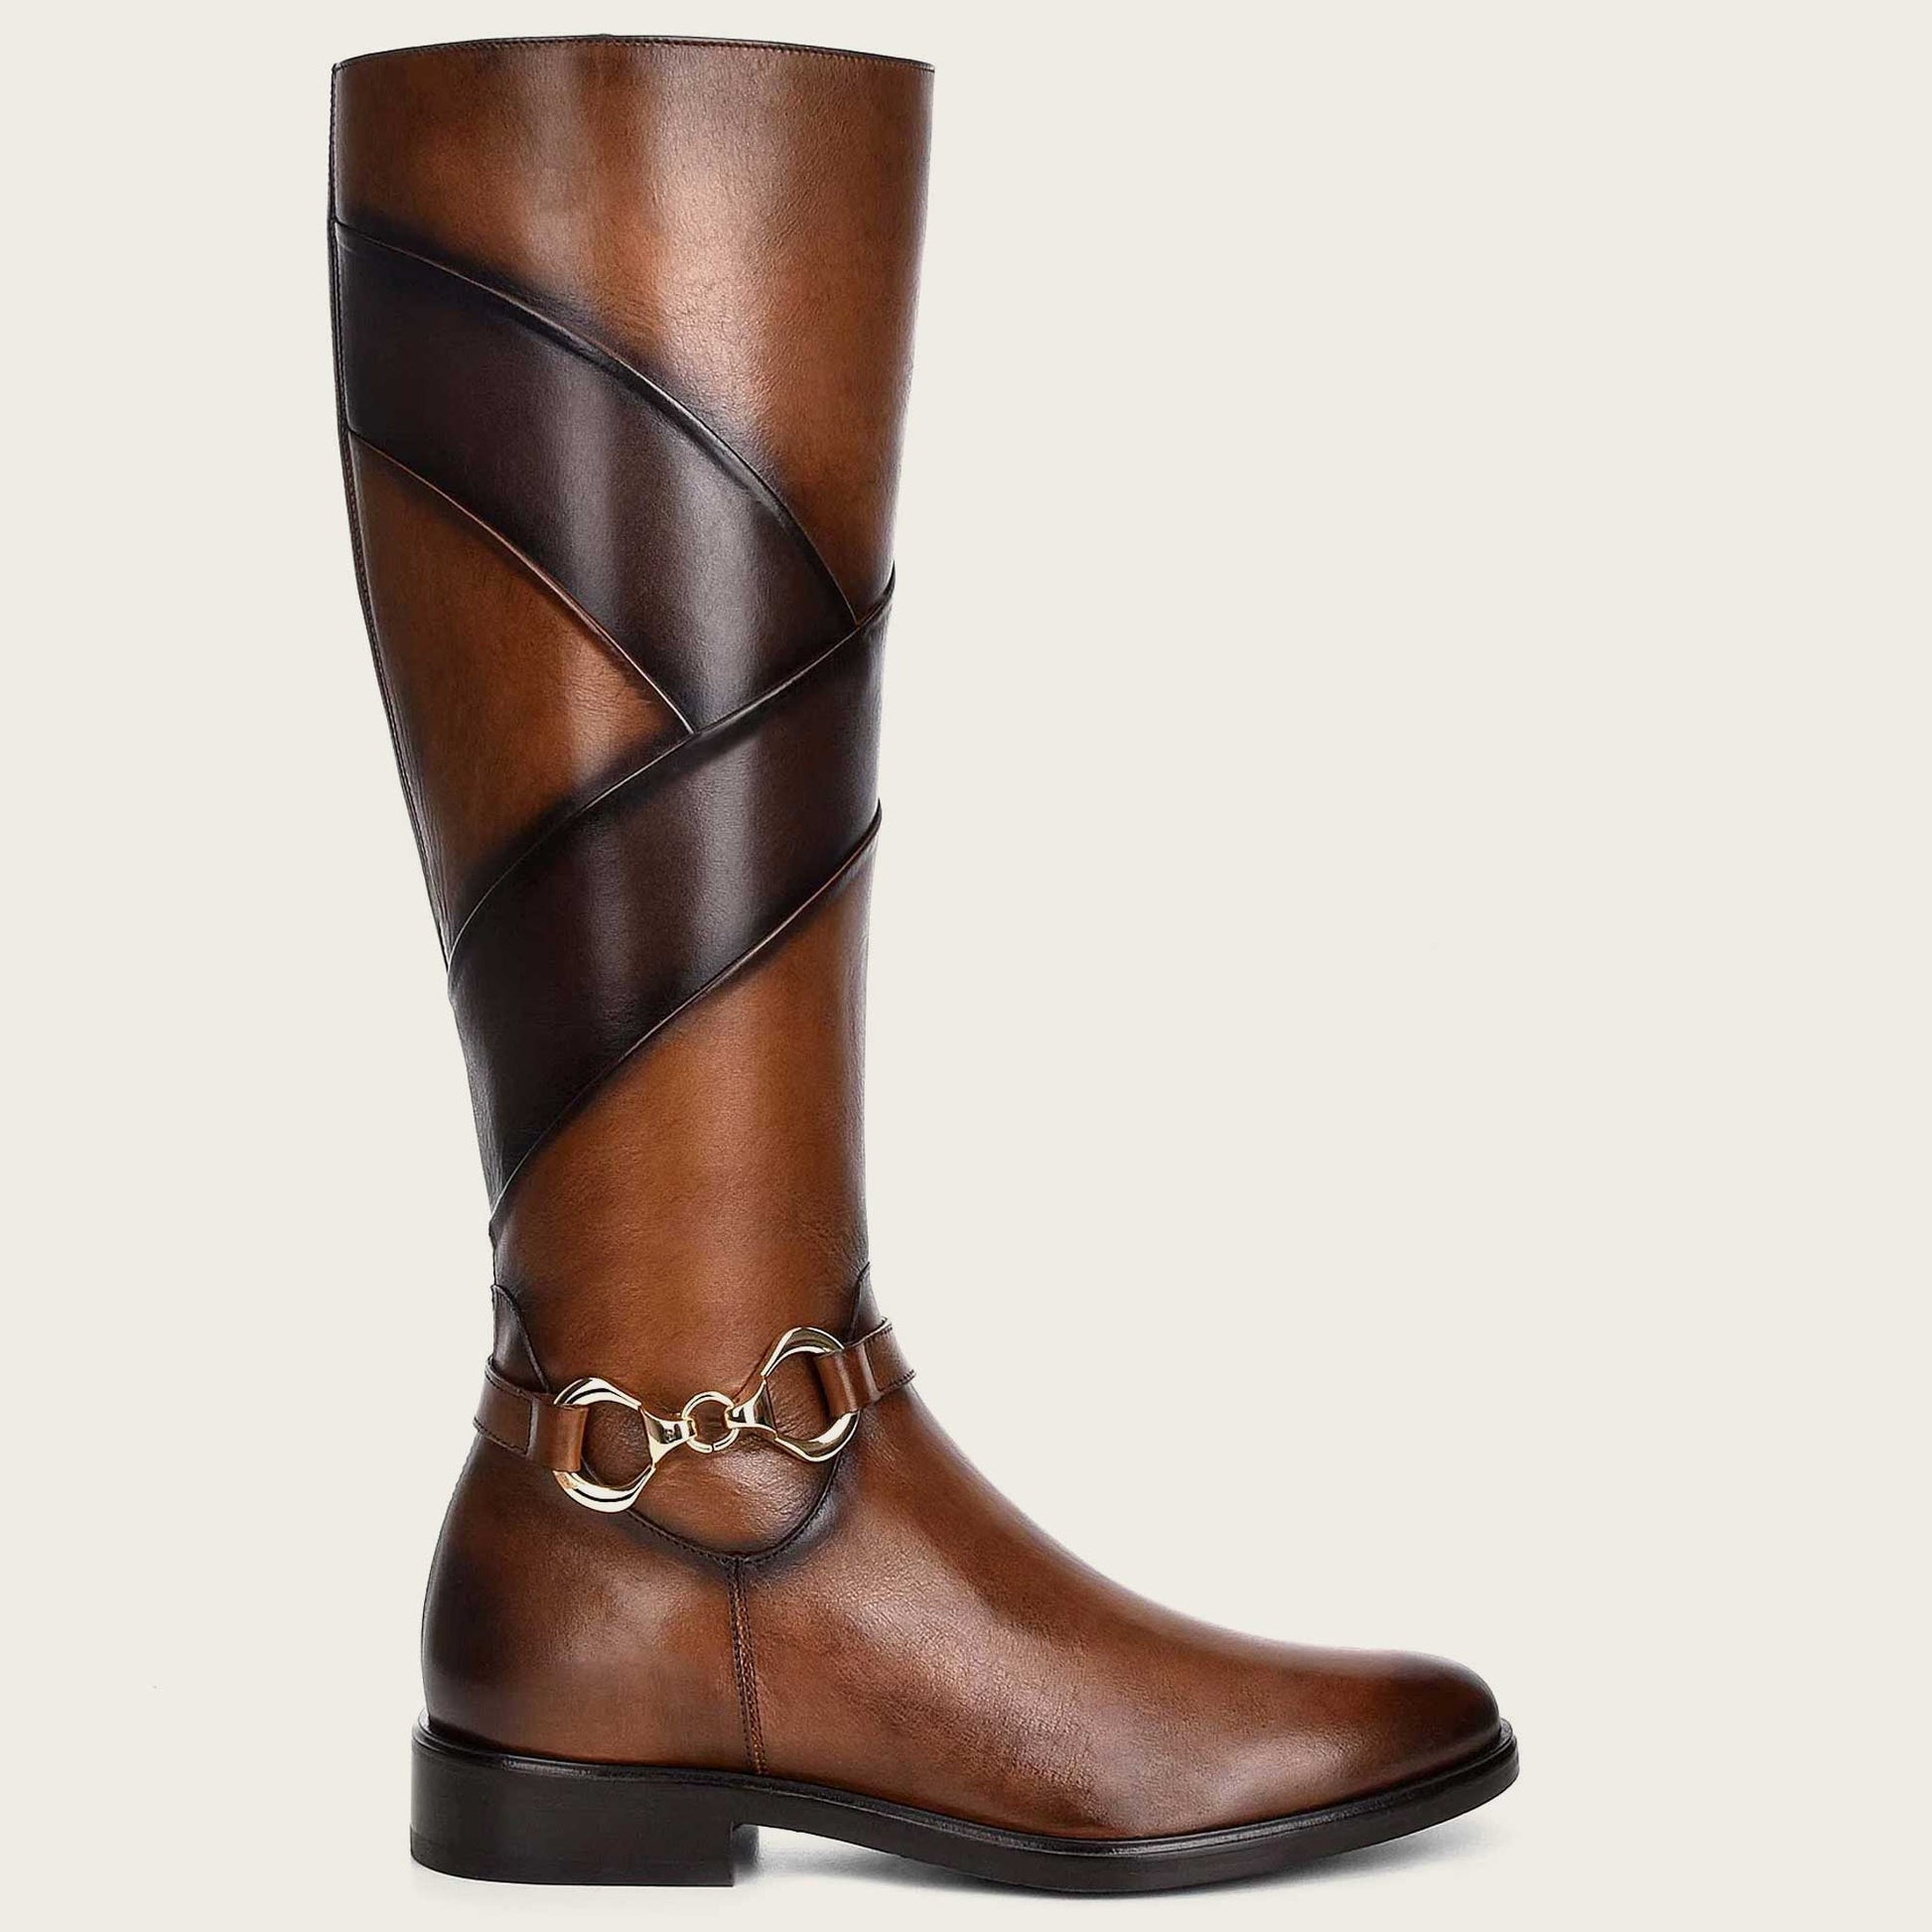 Hand-painted honey leather riding boot with contrasting colors and fine metallic detailing.